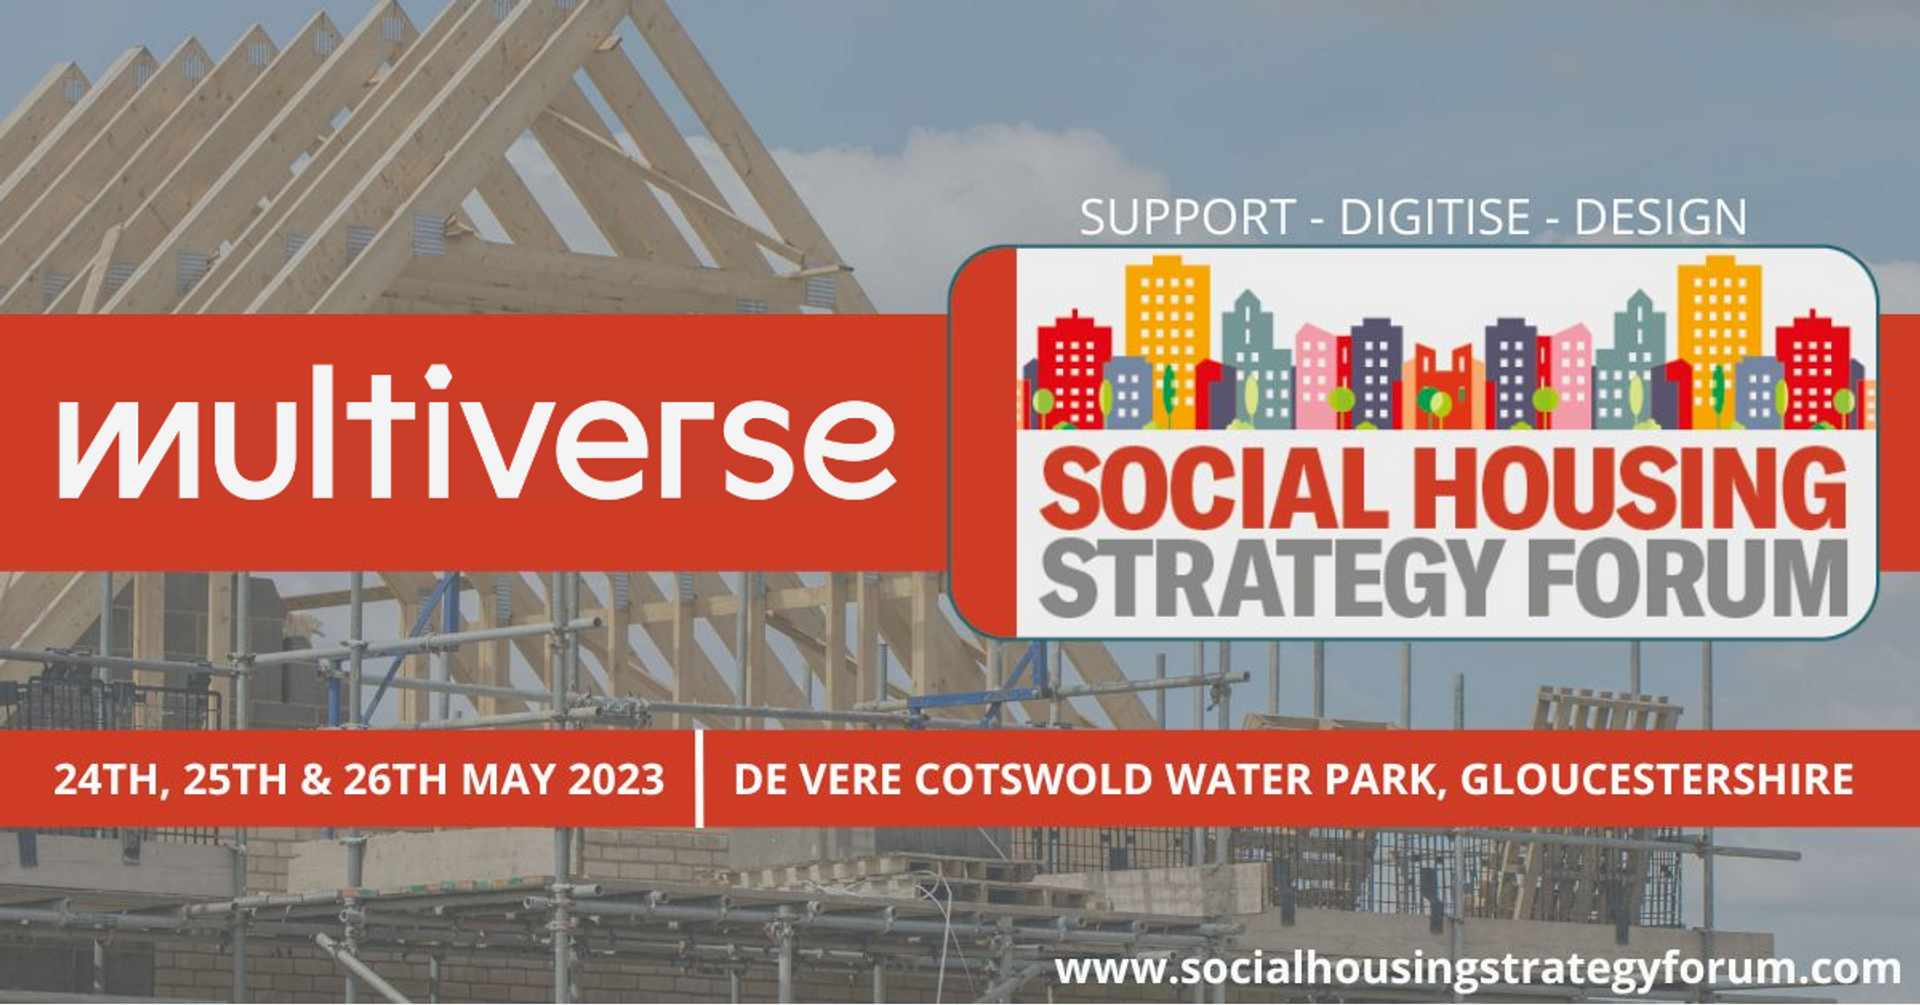 Multiverse at Social Housing Strategy Forum 23